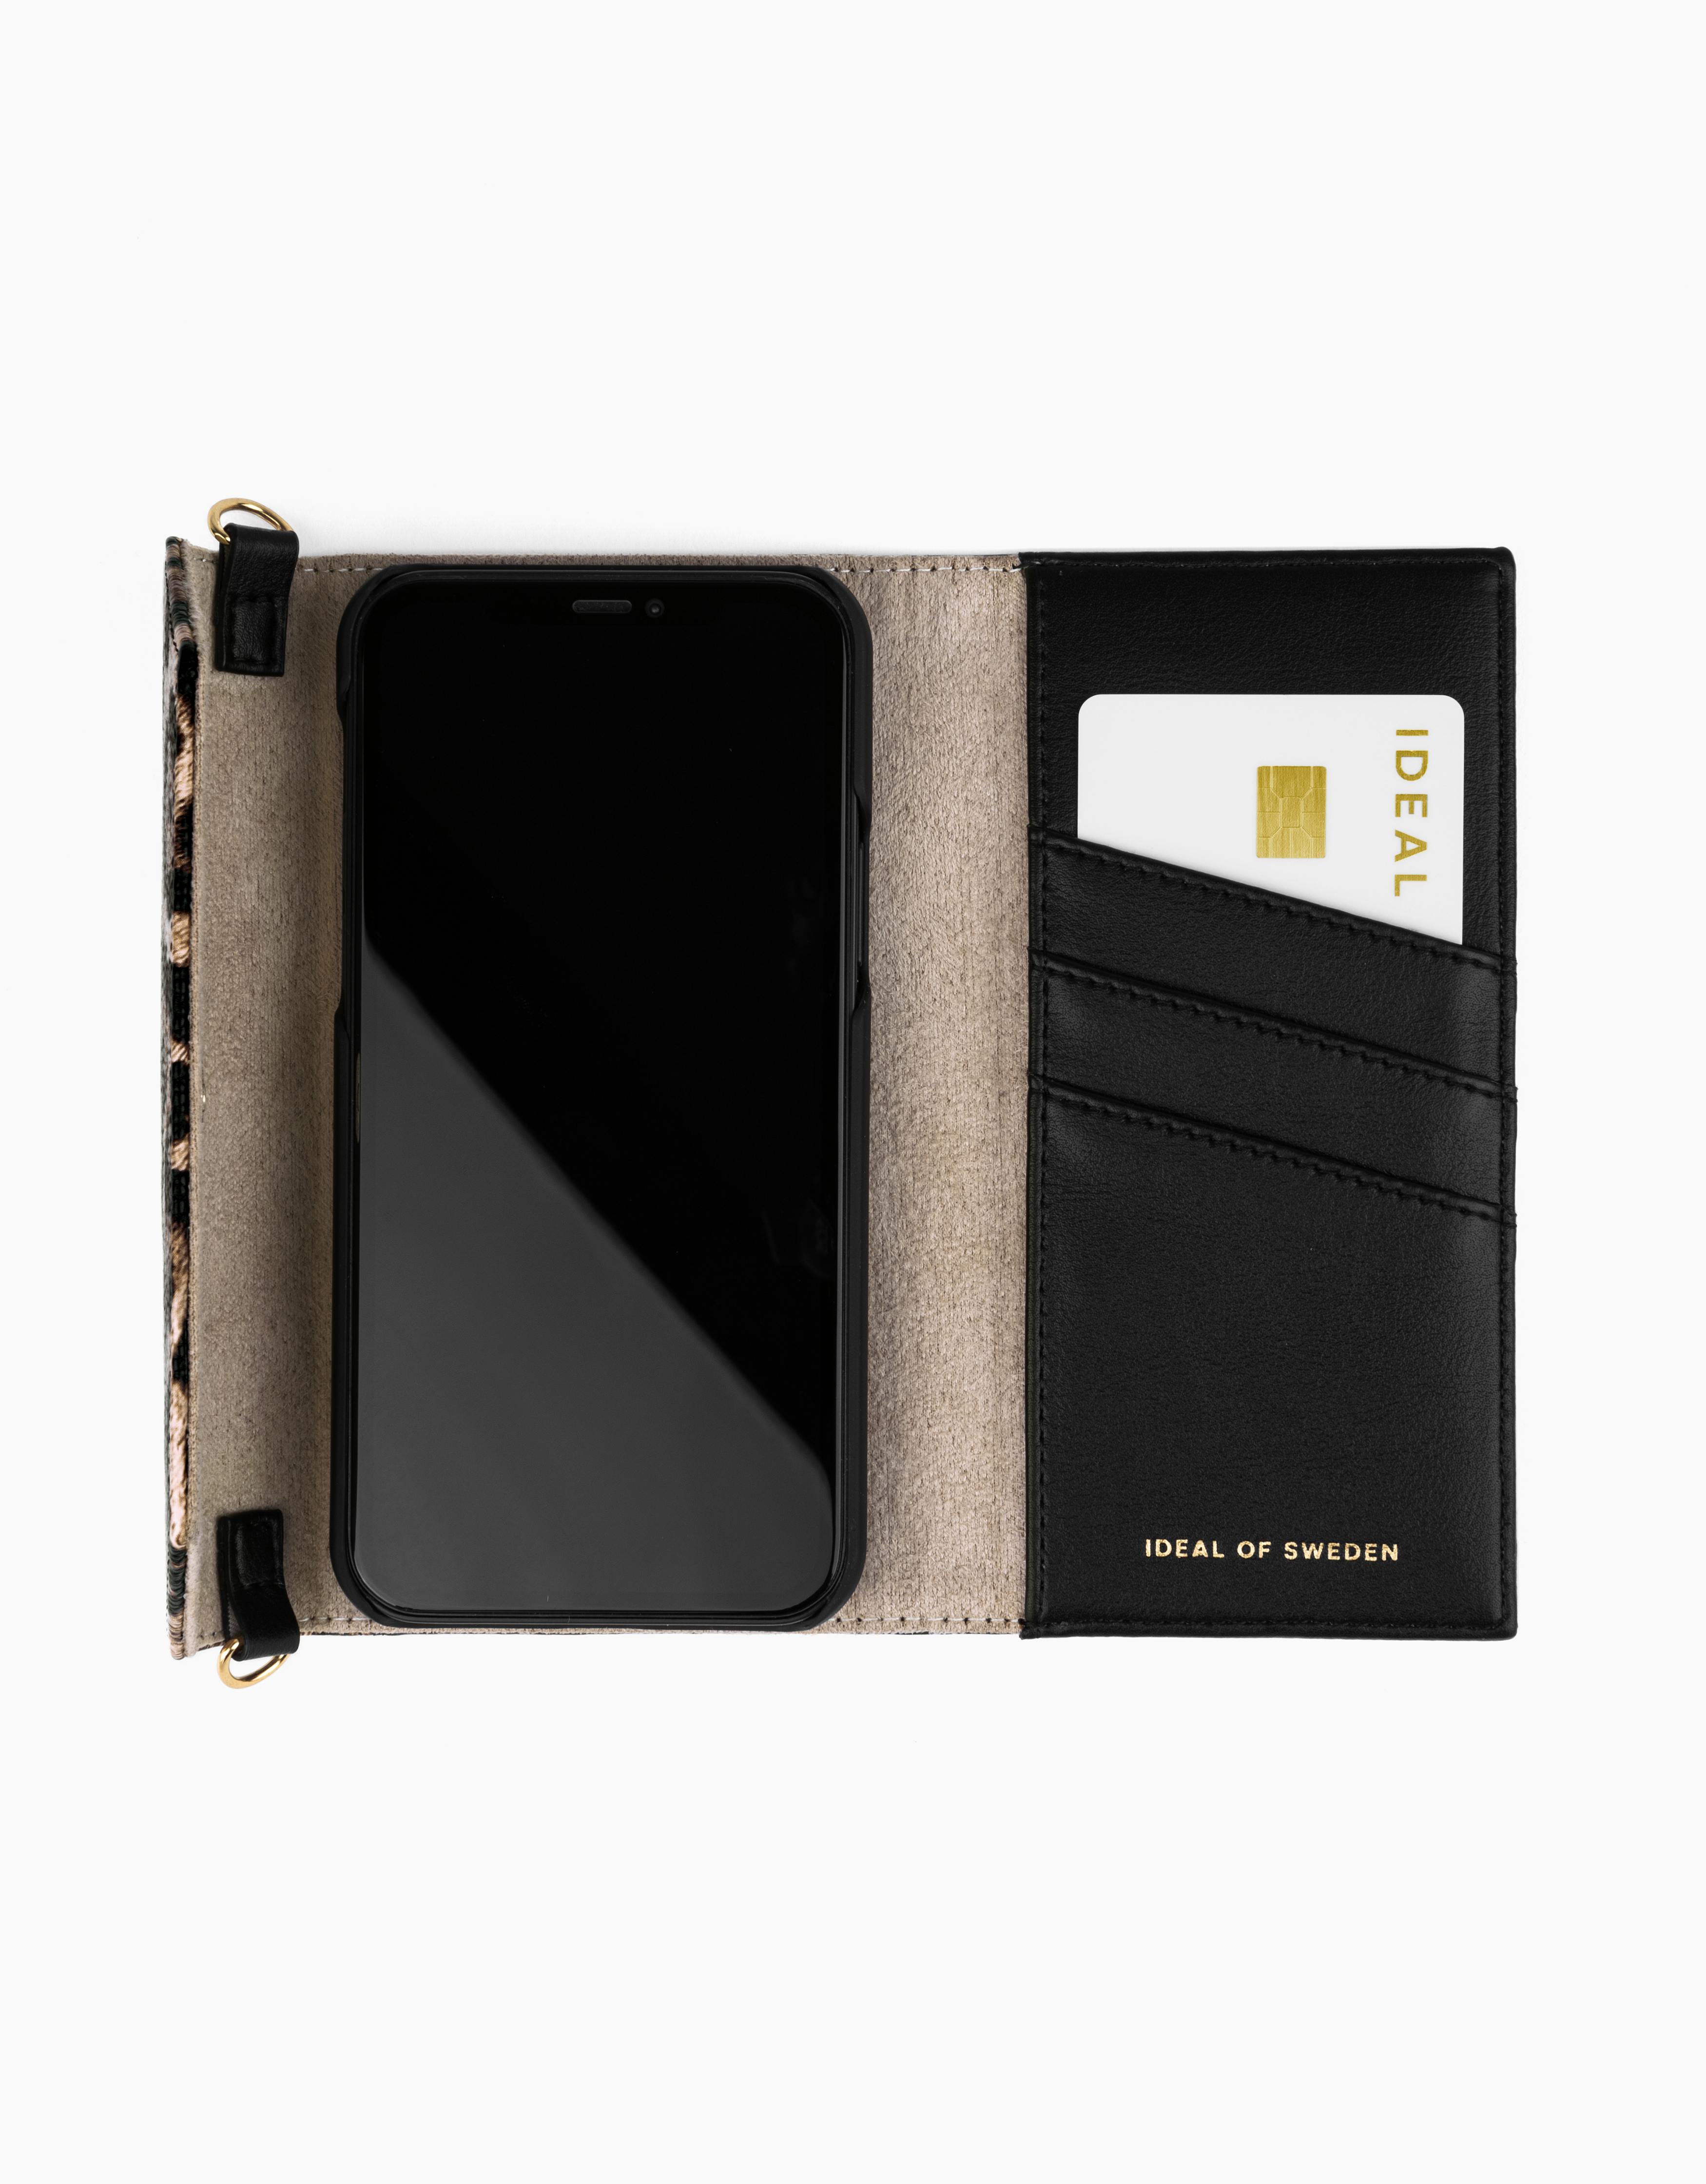 IDEAL OF SWEDEN Cassette Clutch Case for iPhone 13 Pro - Midnight Leopard